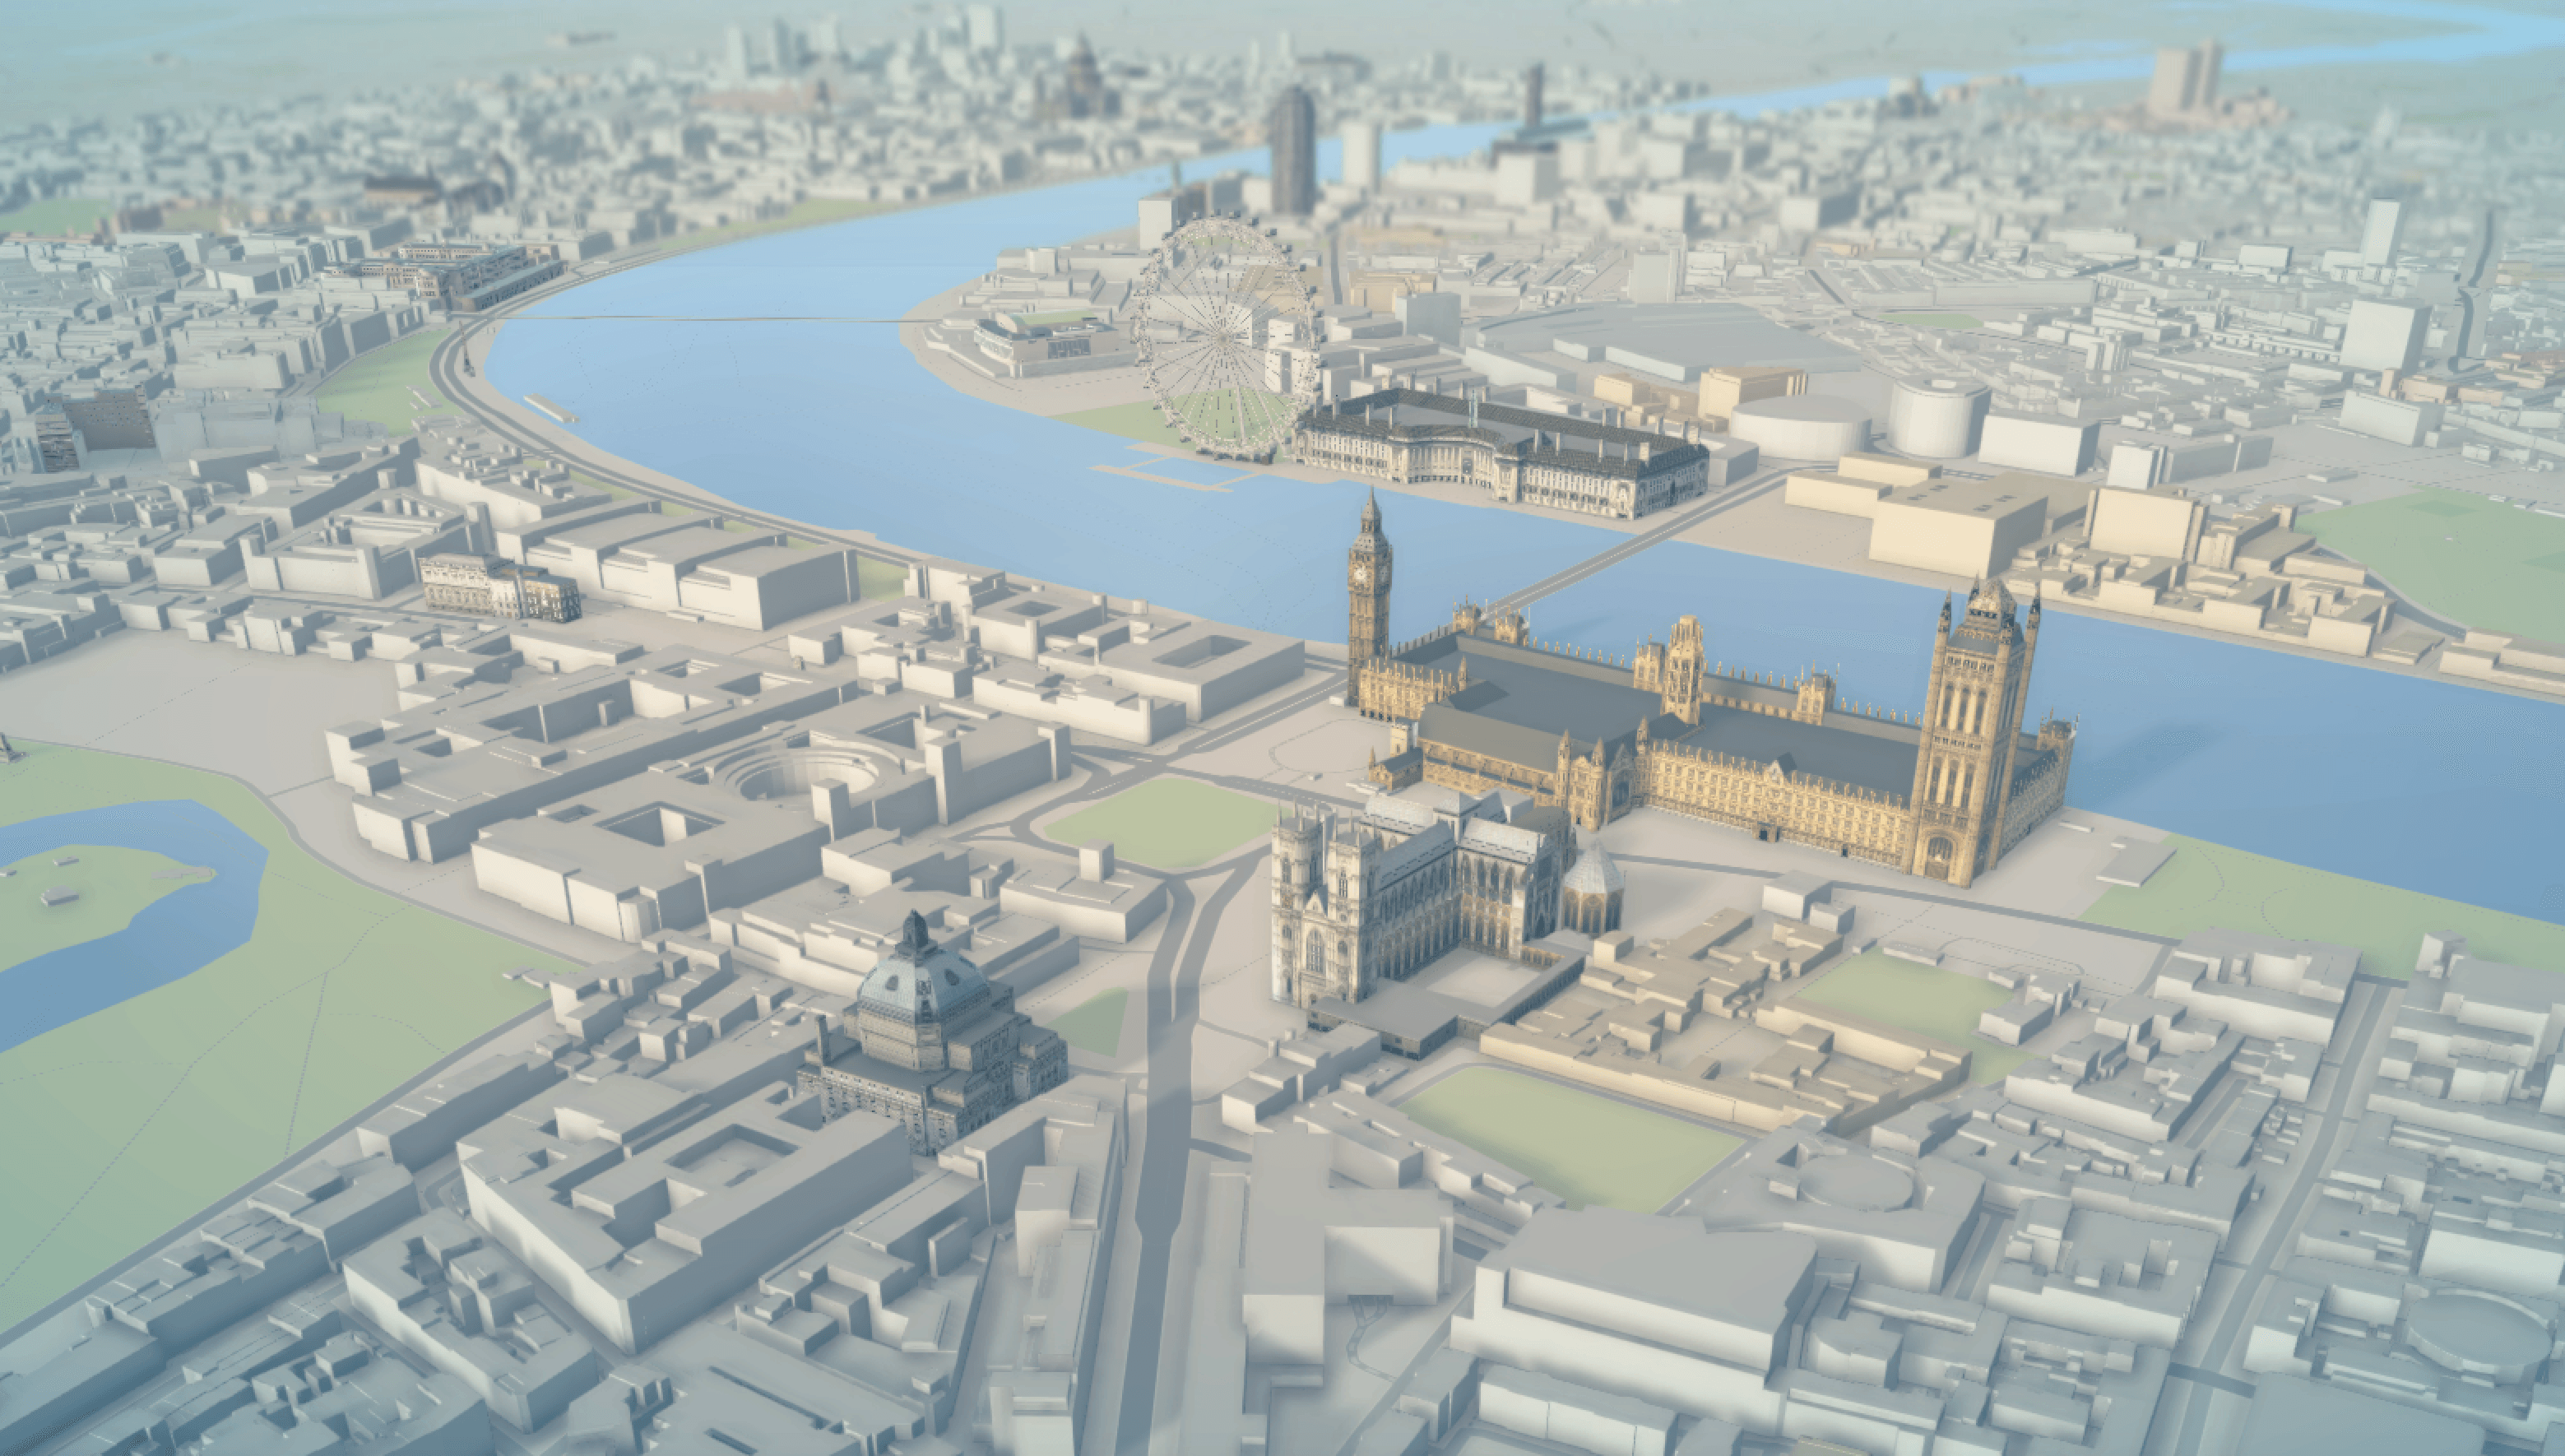 A highliy detailed birds-eye view of London in TomTom Orbis Maps.